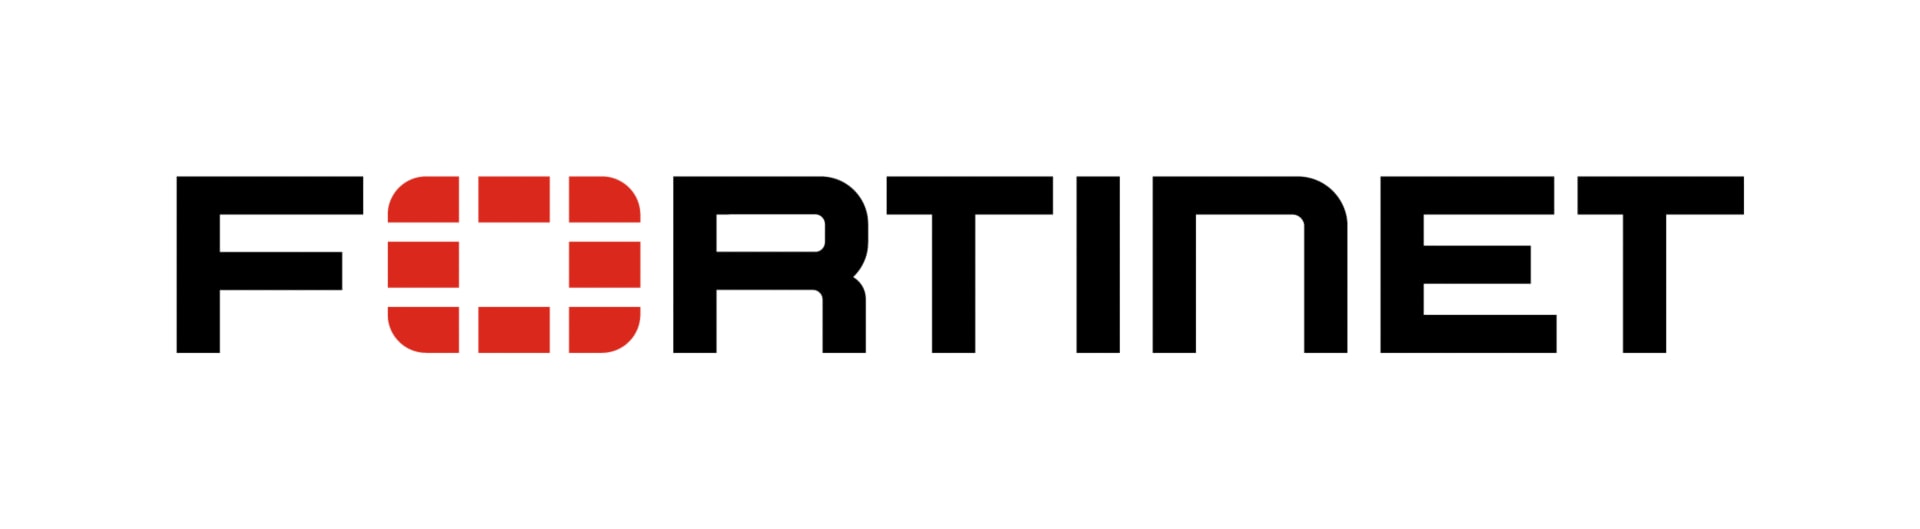 Fortinet FortiCare Priority RMA 4-hour Courier - extended service agreement (renewal) - 3 years - shipment